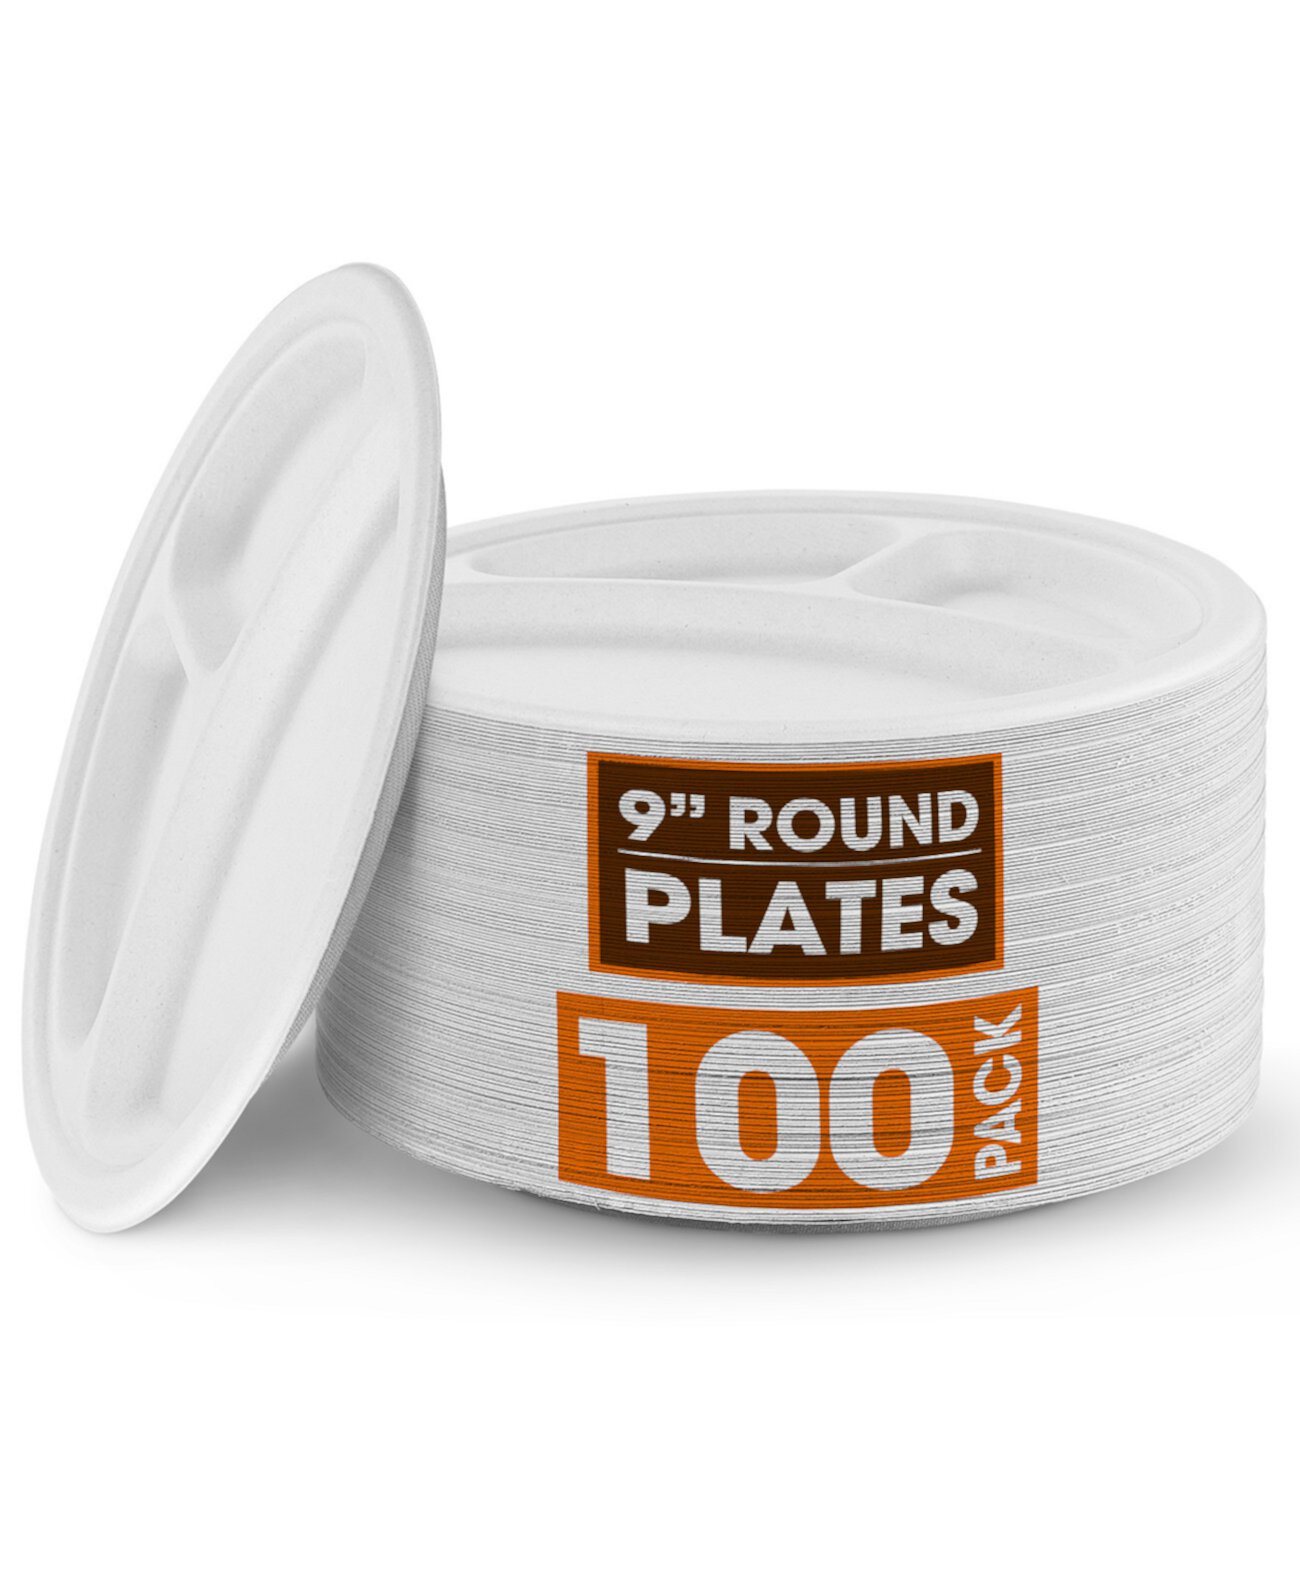 9 Inch Compartment Paper Plates, 100 Pack Cheer Collection